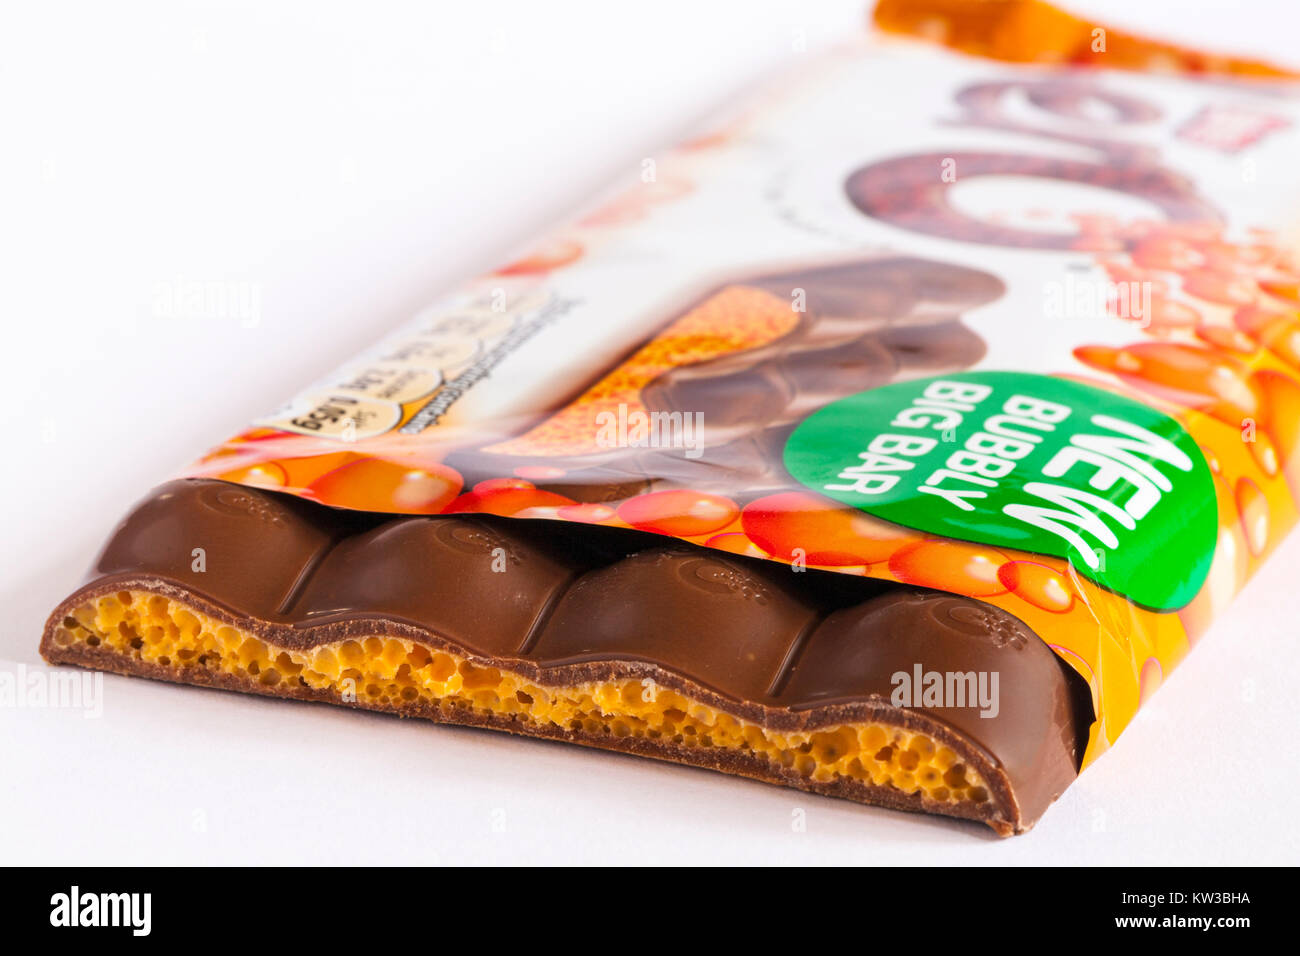 Nestle Orange aero new bubbly big bar of chocolate with piece broken off to see inside set on white background Stock Photo